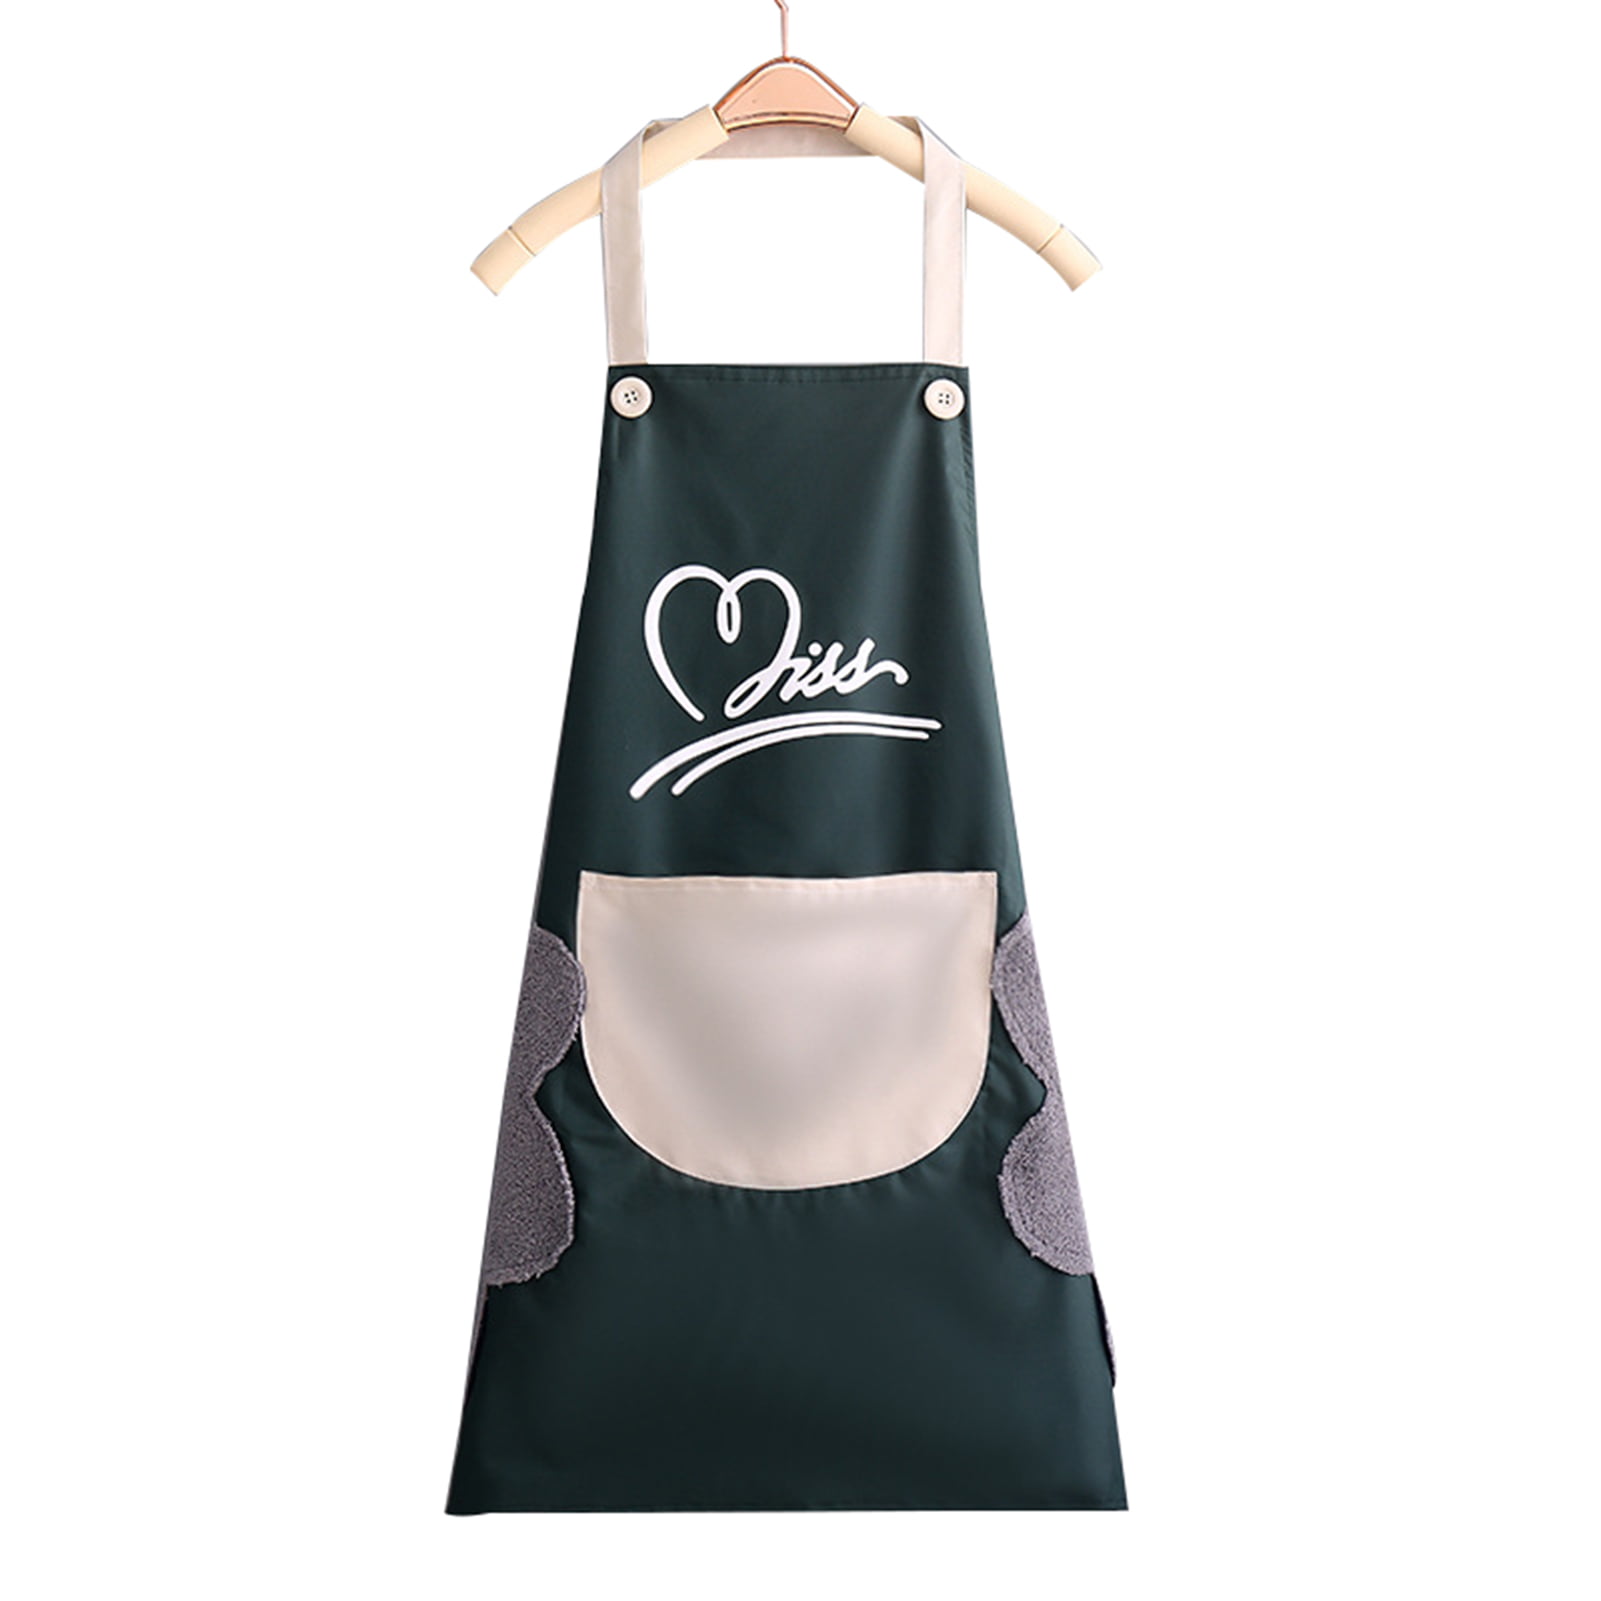 Details about   1pc Cotton Comfortable Practical Sleeveless Apron for Women Kitchen 